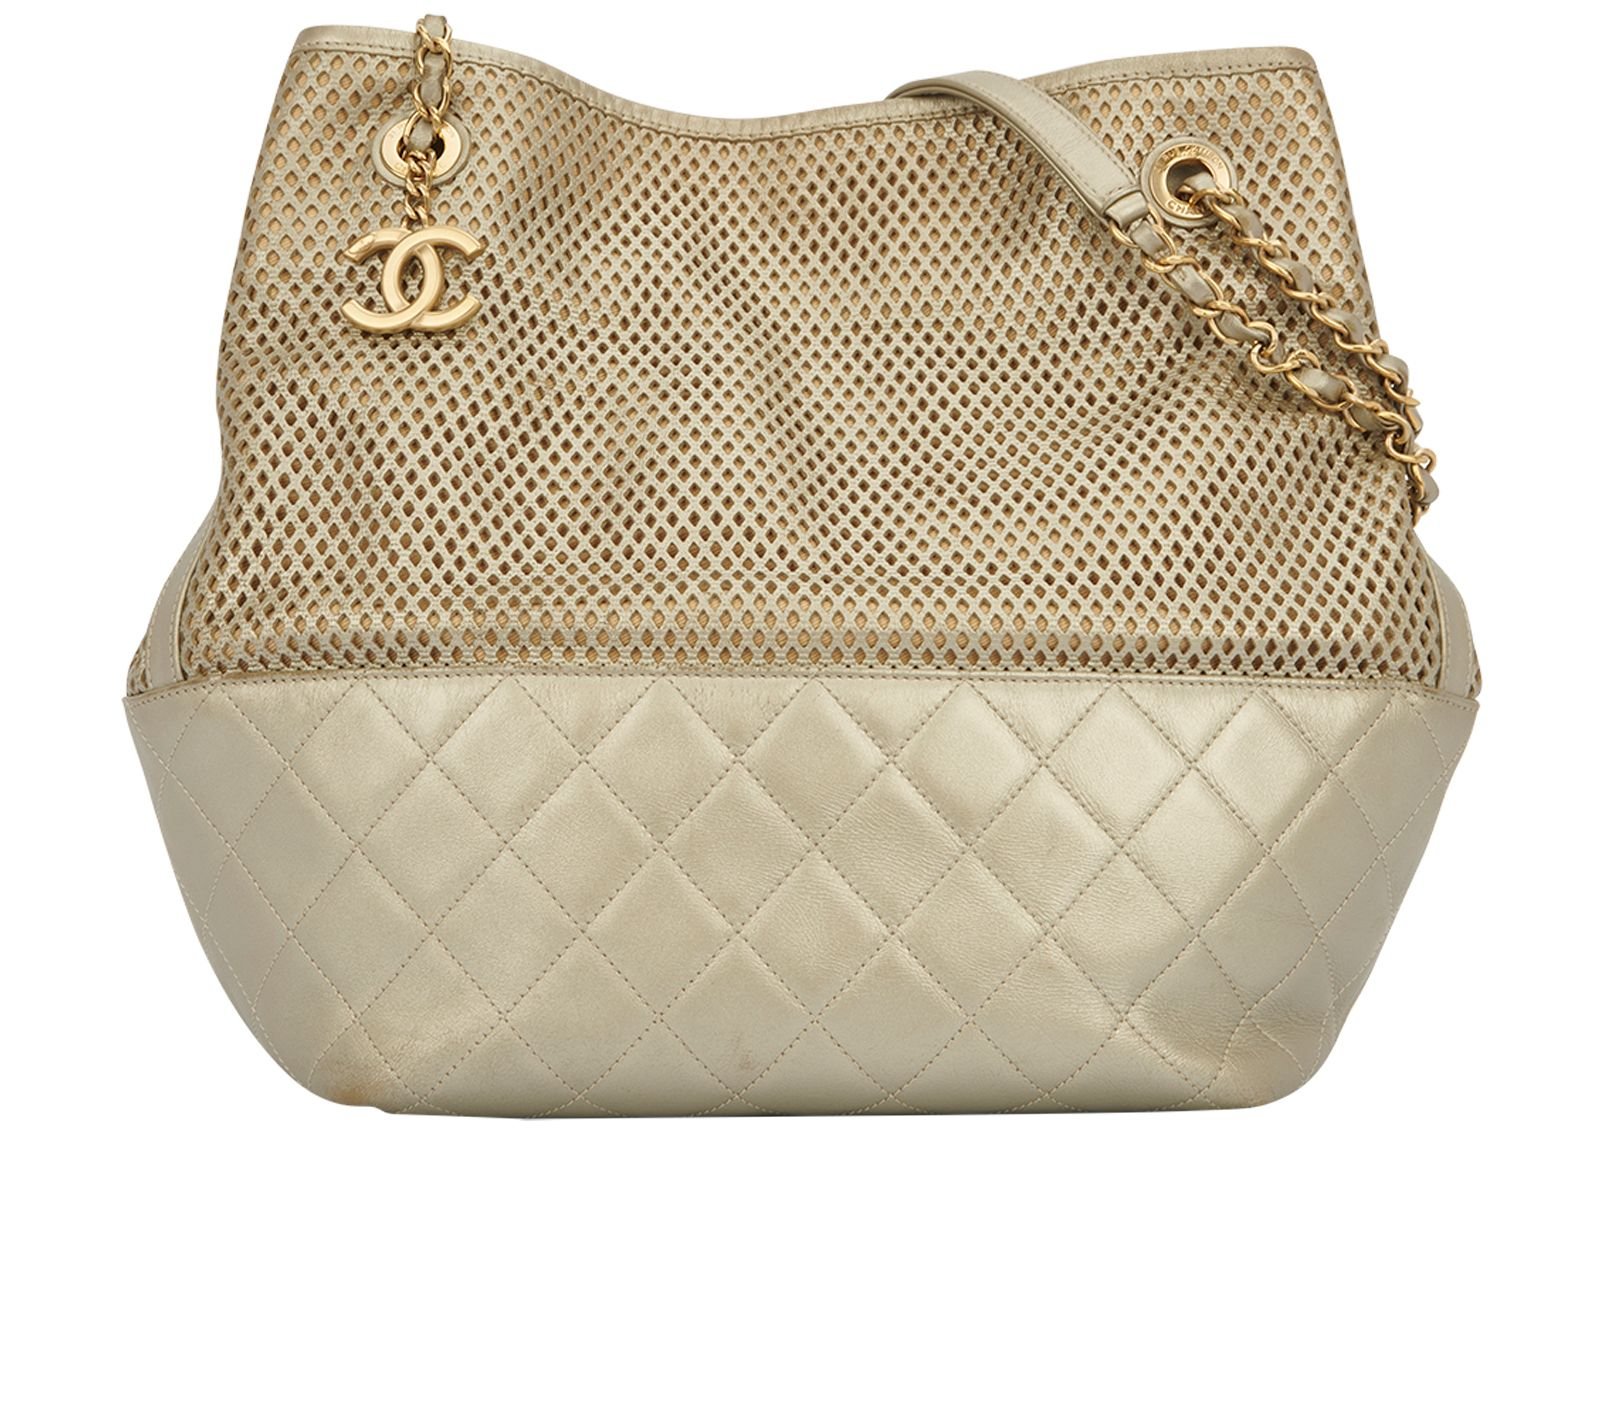 Up In The Air Perforated Tote, Chanel - Designer Exchange